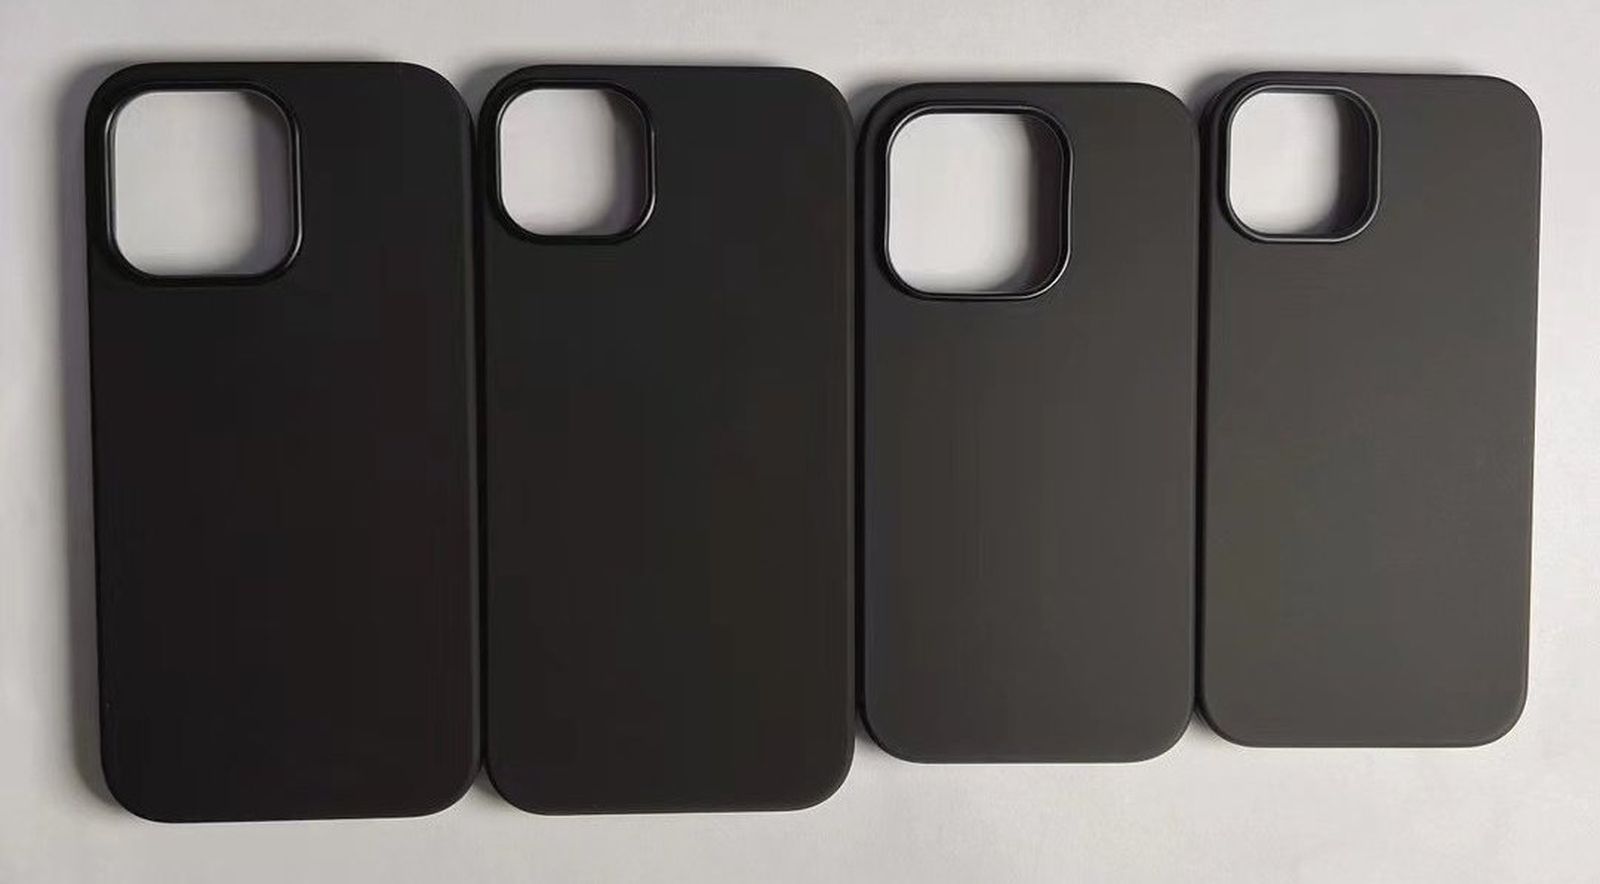 iPhone 14 Cases Offer Best Preview Yet of Relative Camera Bump Sizes